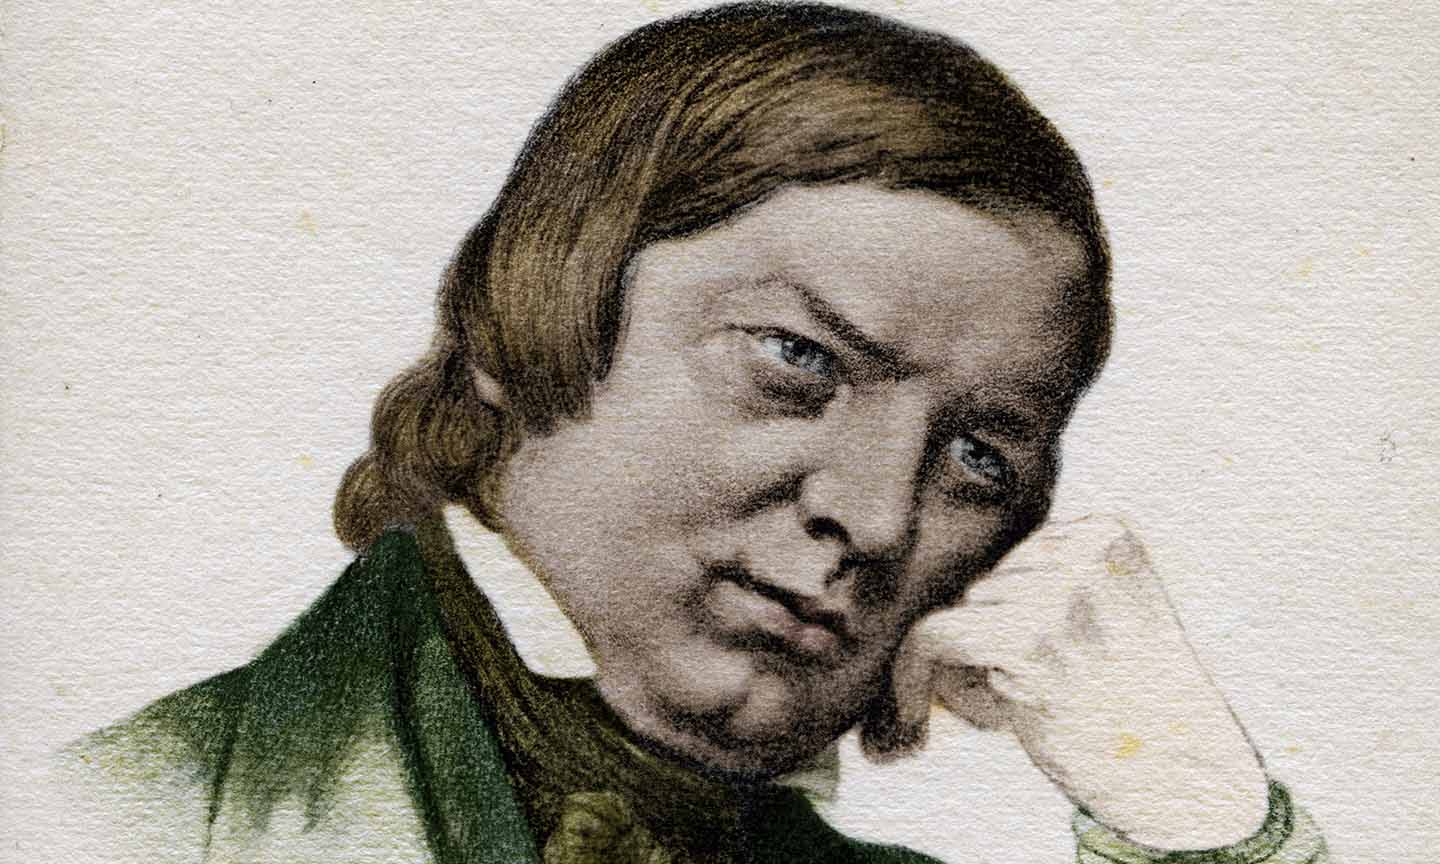 Best Schumann Works: 10 Essential Pieces By The Great Composer